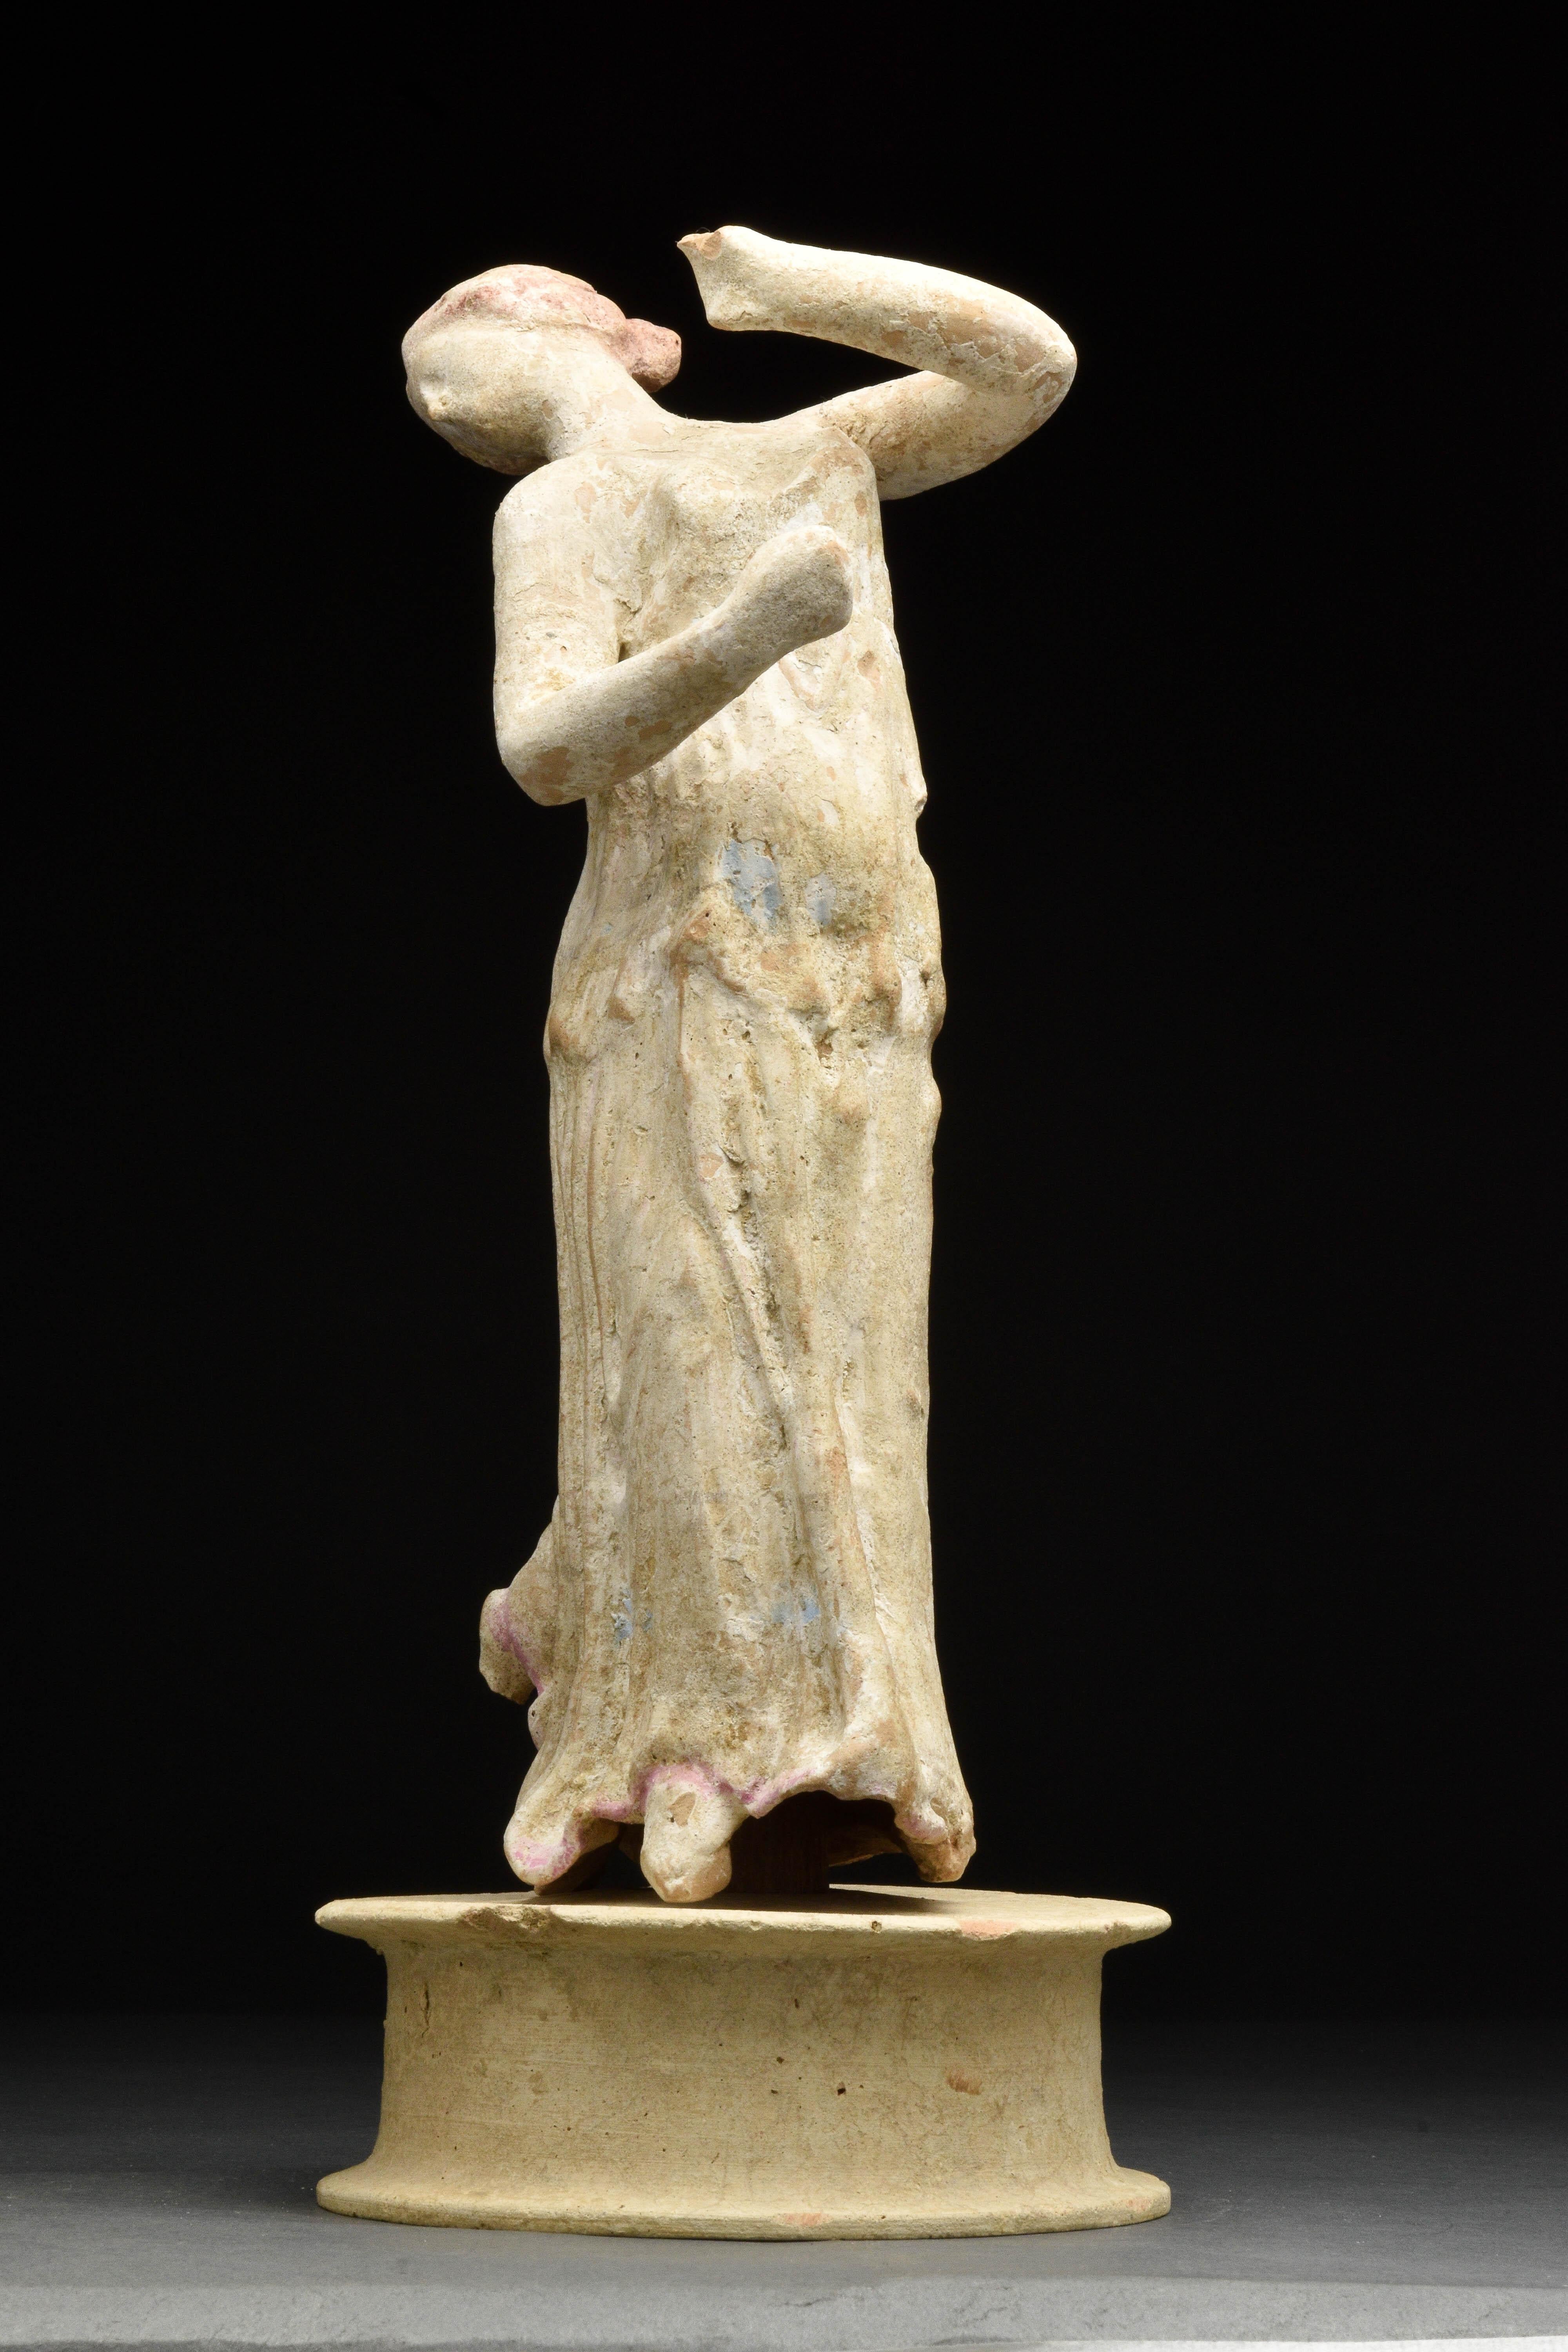 Circa 200 BC 
An ancient Greek Canosan terracotta statuette, perhaps from centurpipe, Sicily. The piece depicts a woman wearing a chiton, her body twisting spirally to the right, head thrown back and turned sharply to her right. Left leg raised